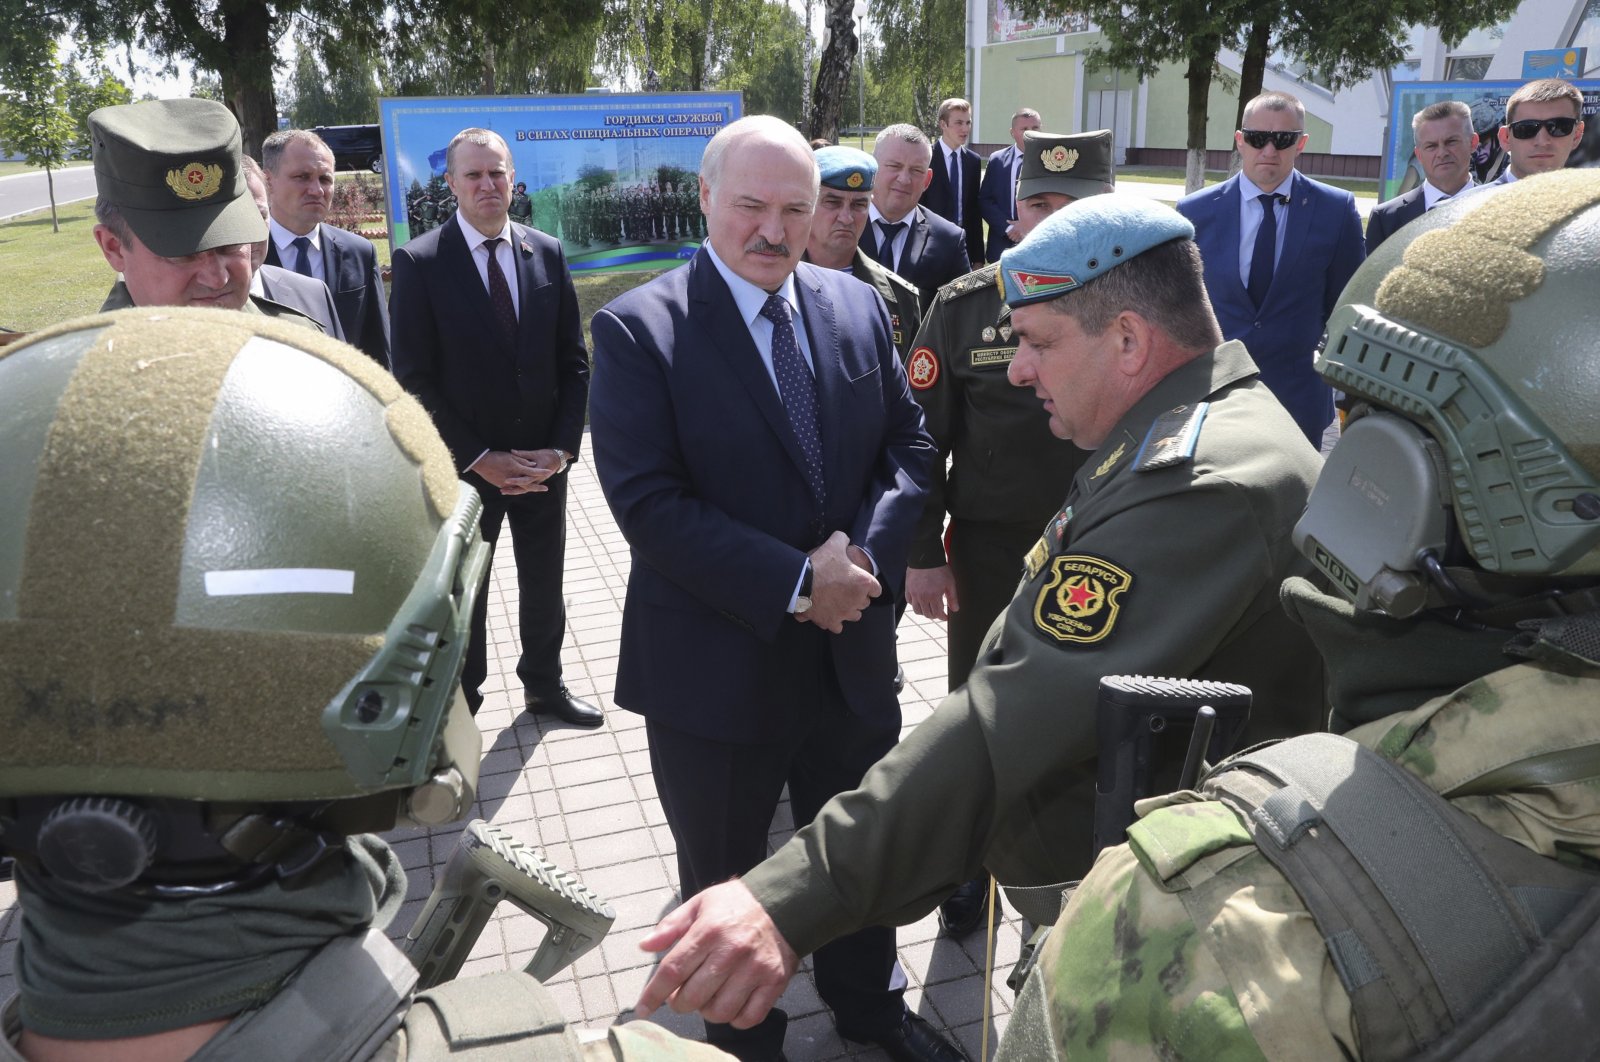 Belarusian President Alexander Lukashenko (C) inspects equipment and weapons of Belarusian army special troops as he visits a military base in the town of Maryina Gorka, 60 km (37 miles) southeast of Minsk, Belarus, July 24, 2020. (AP Photo)